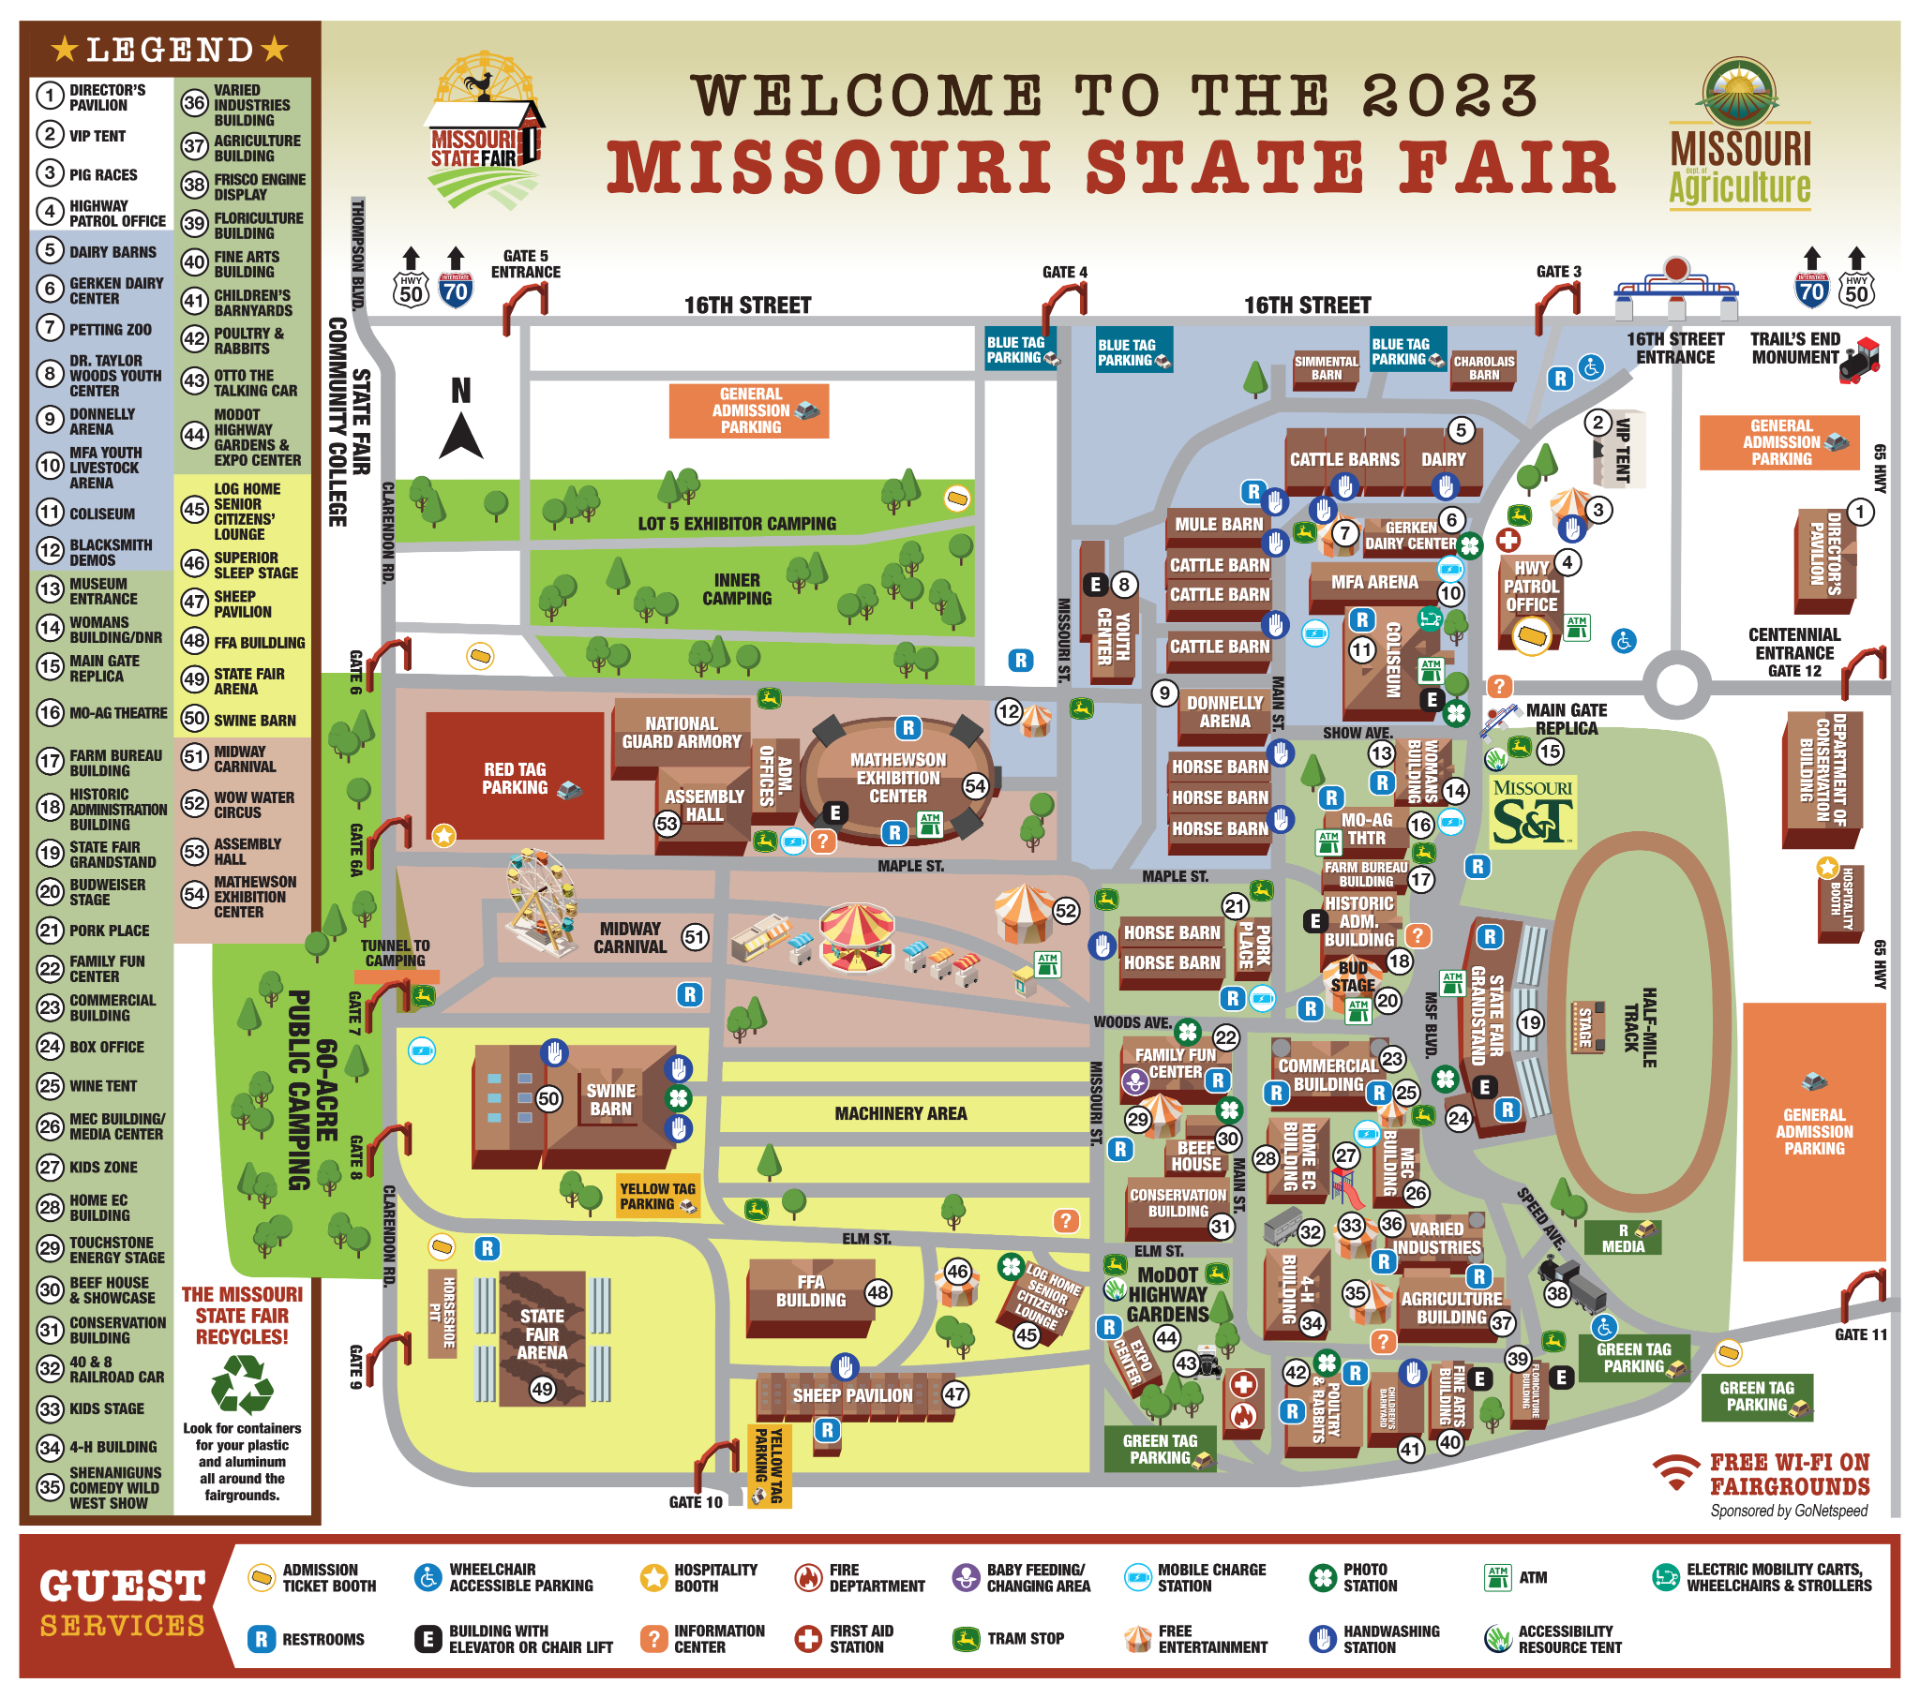 Map of fair grounds showing Missouri S&T near the bandstand, next to the Missouri AG Theatre